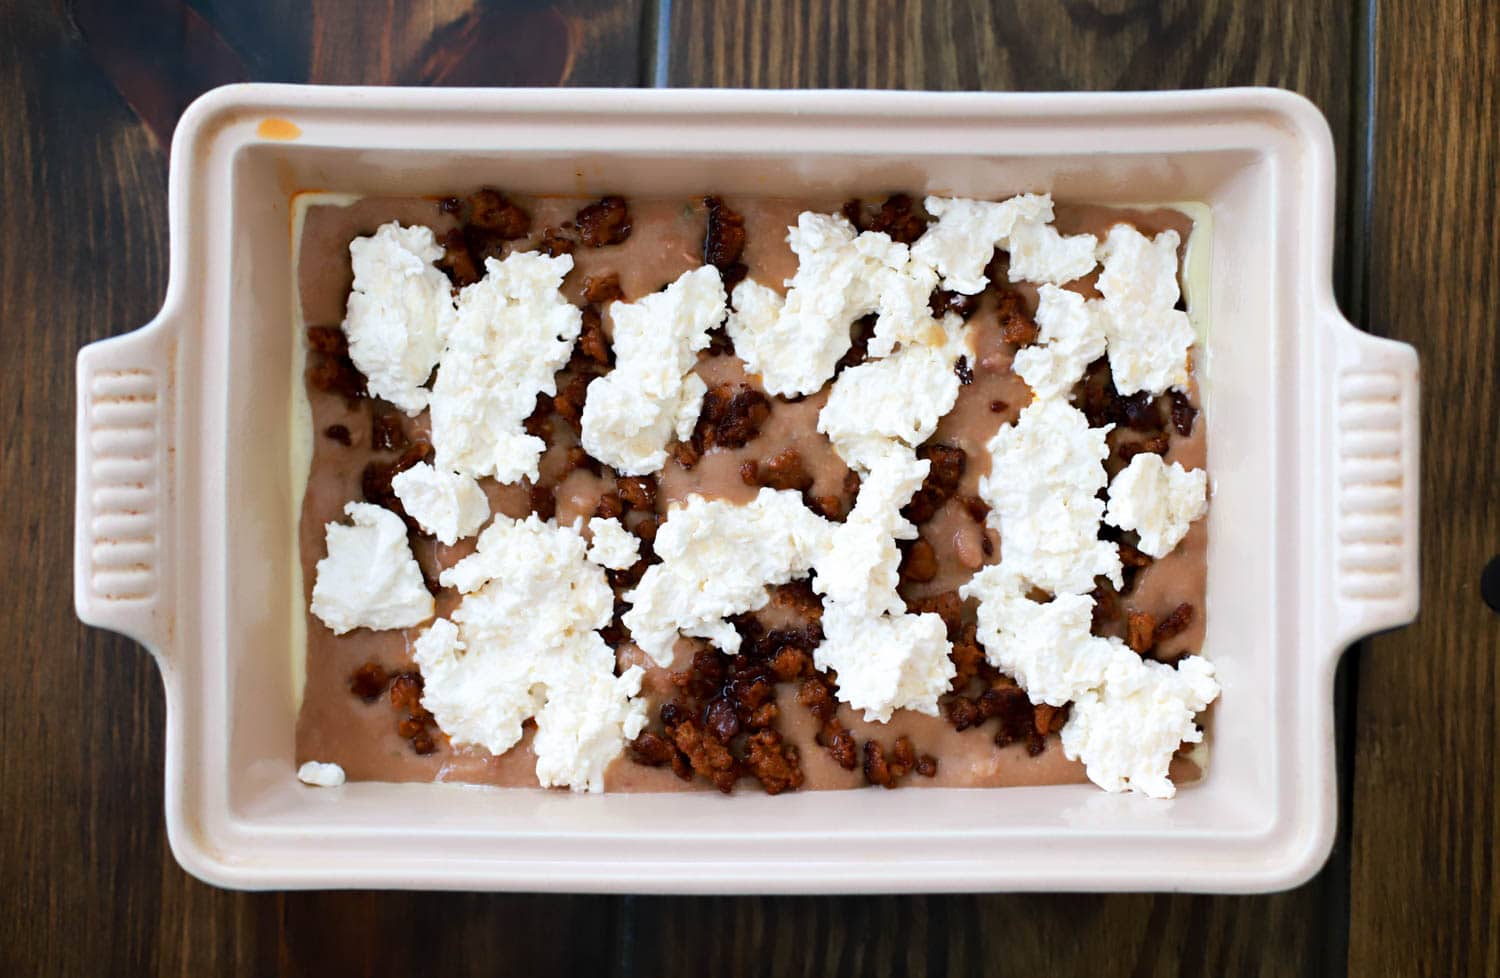 rectangular baking dish with layer of beans topped with sour cream for dip.